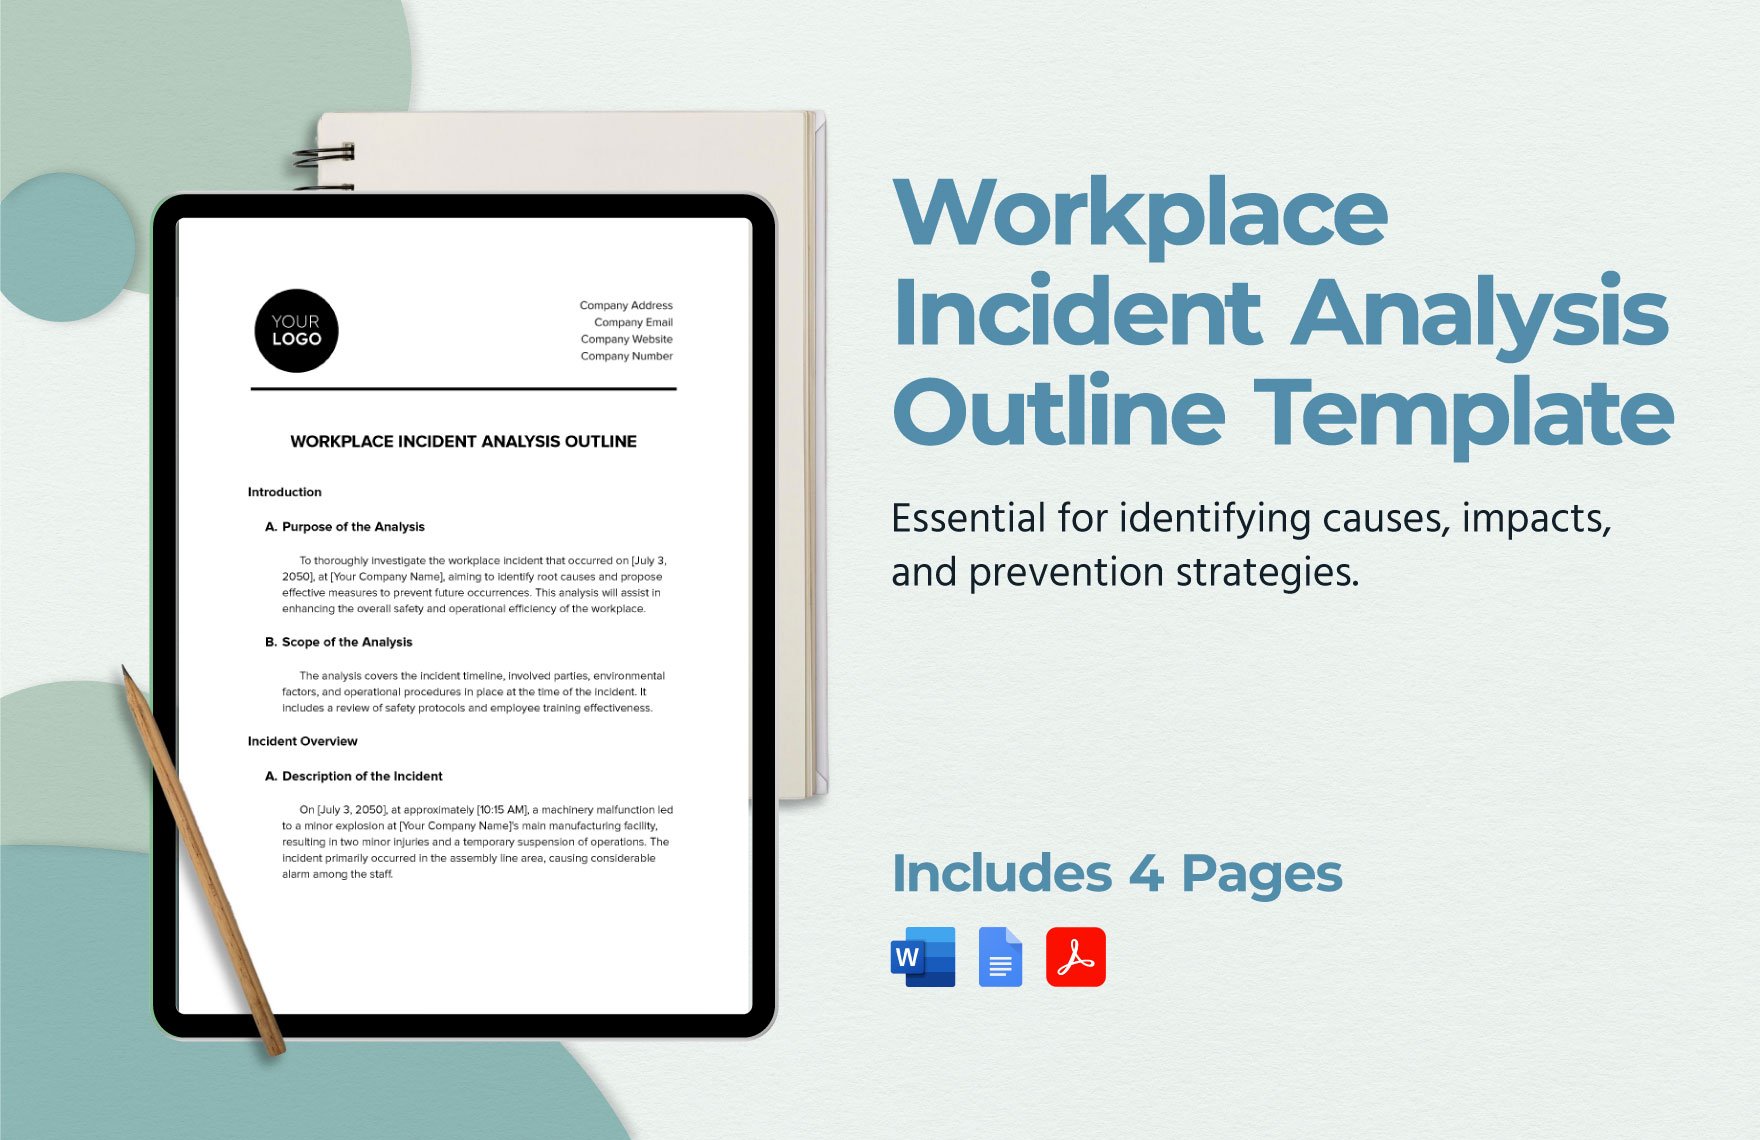 Workplace Incident Analysis Outline Template